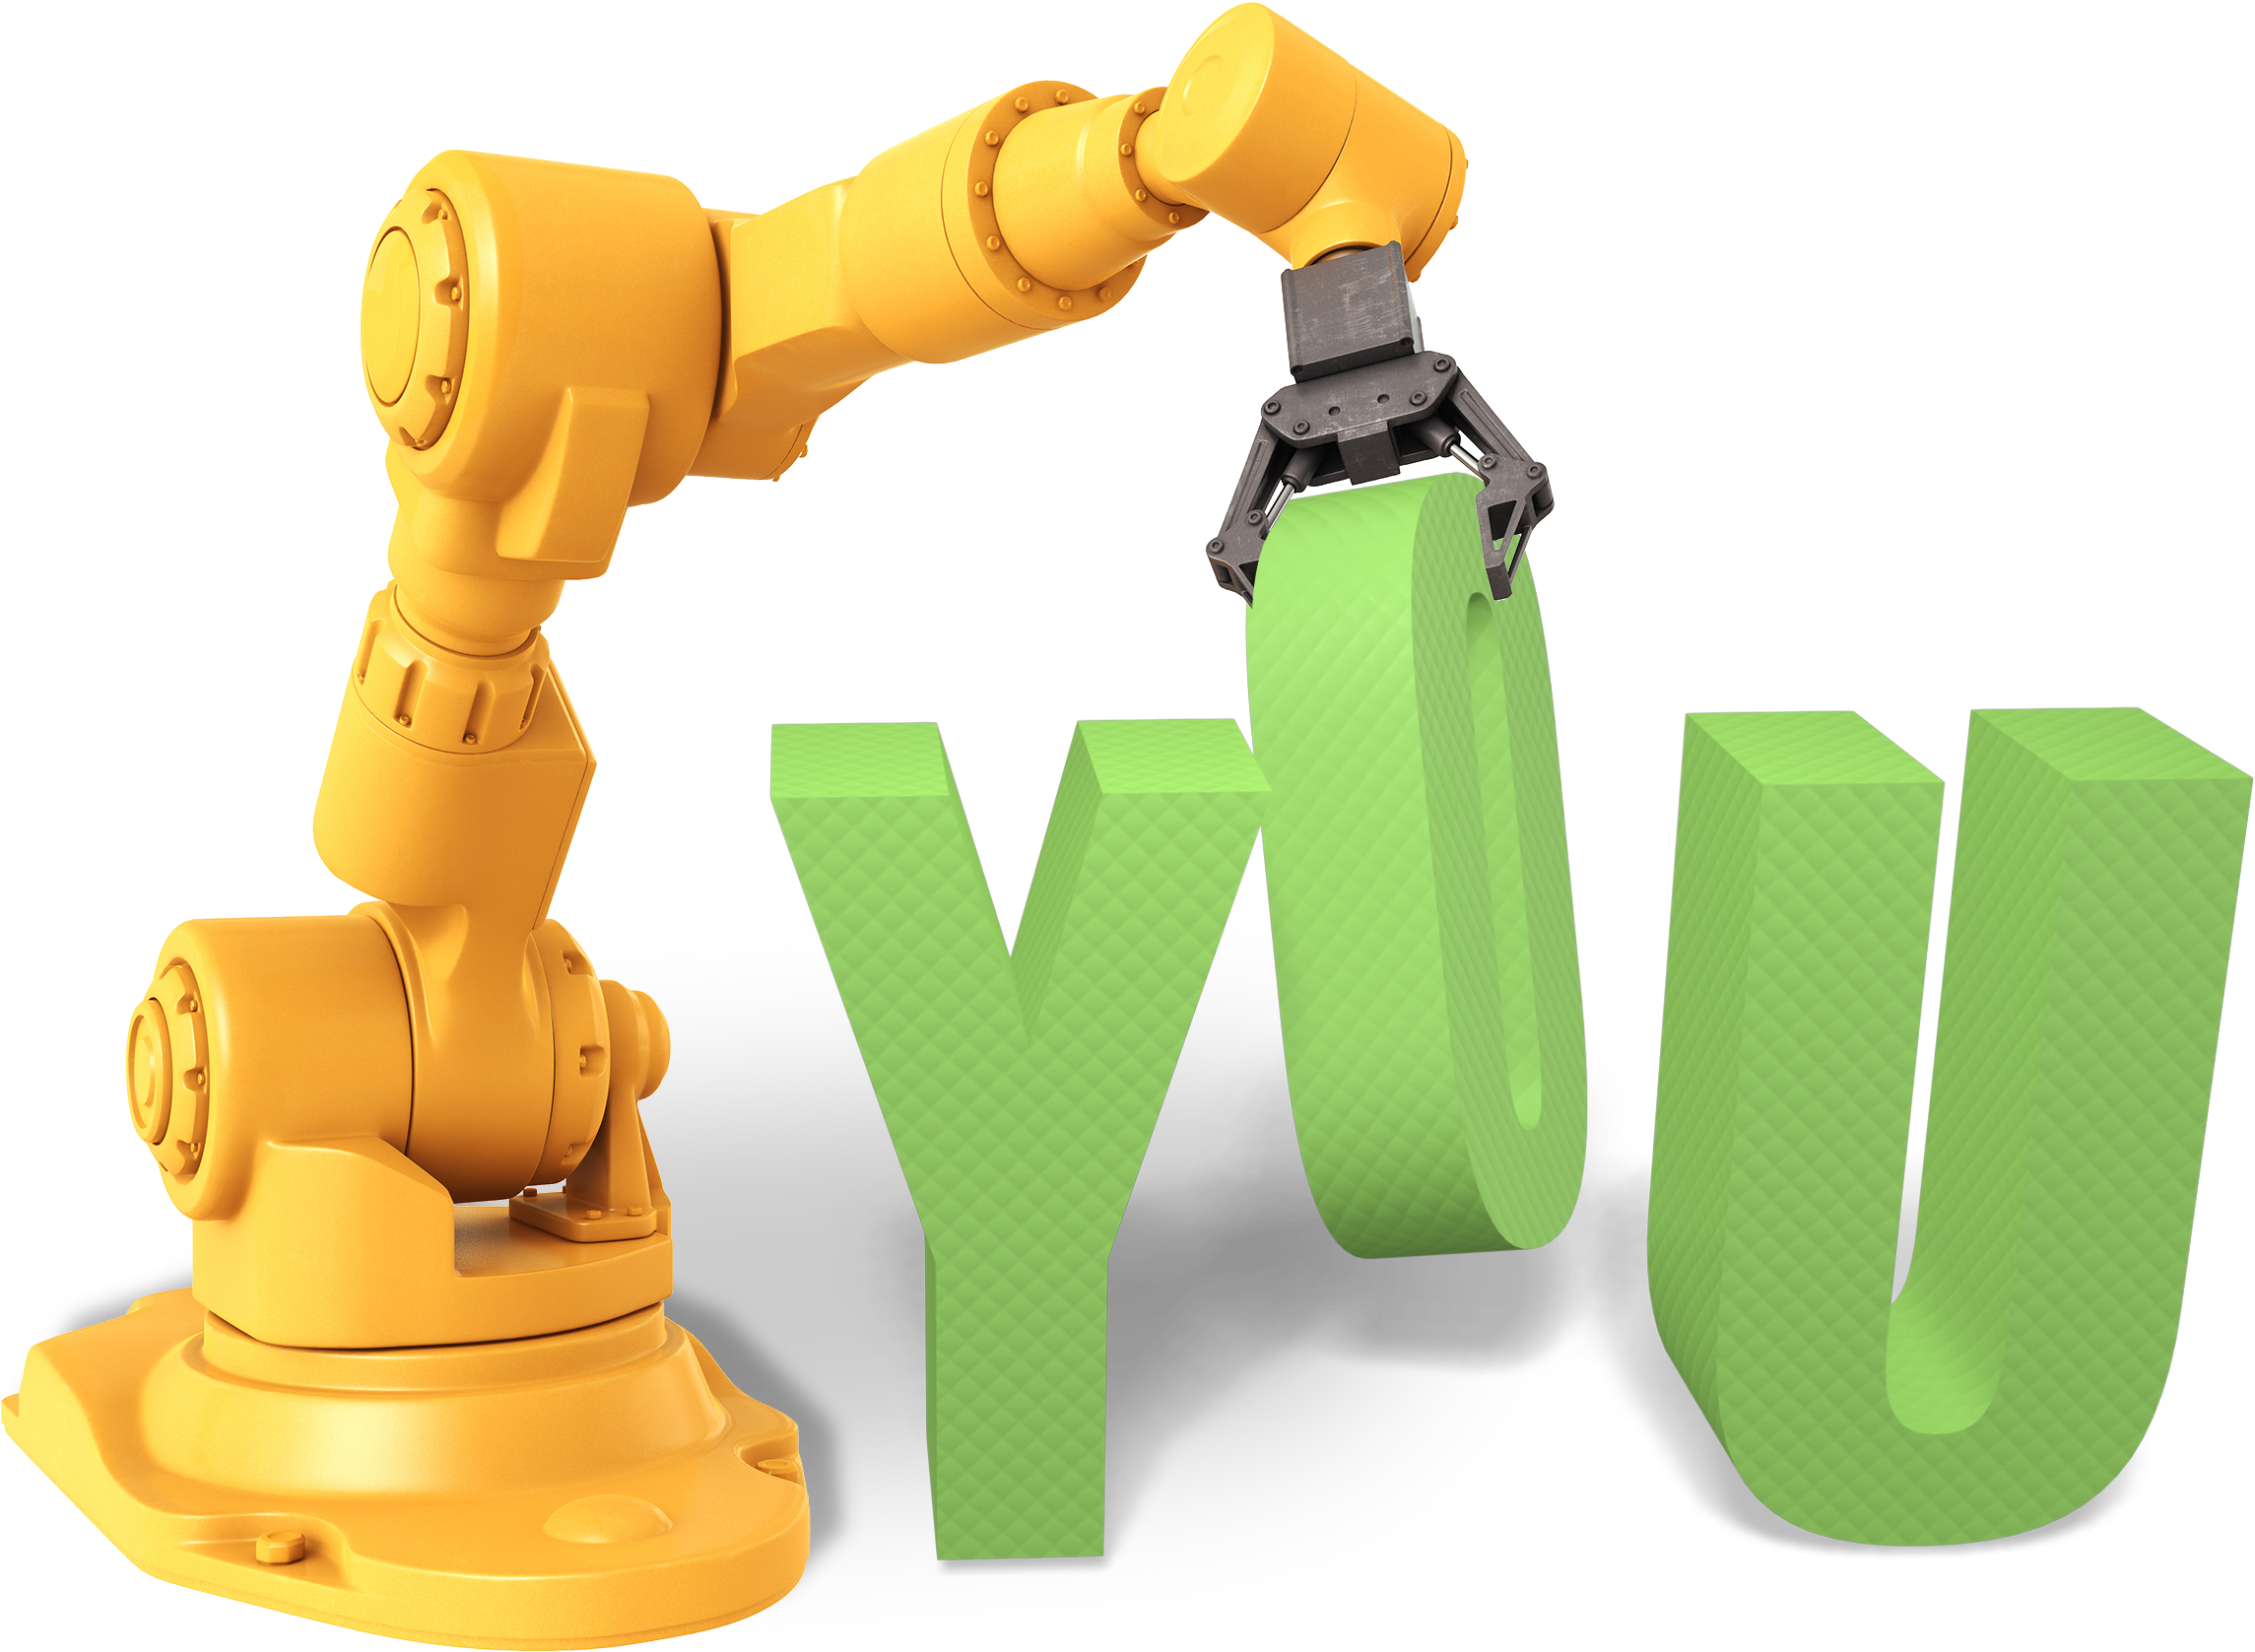 Robot Arm Building the word "You"